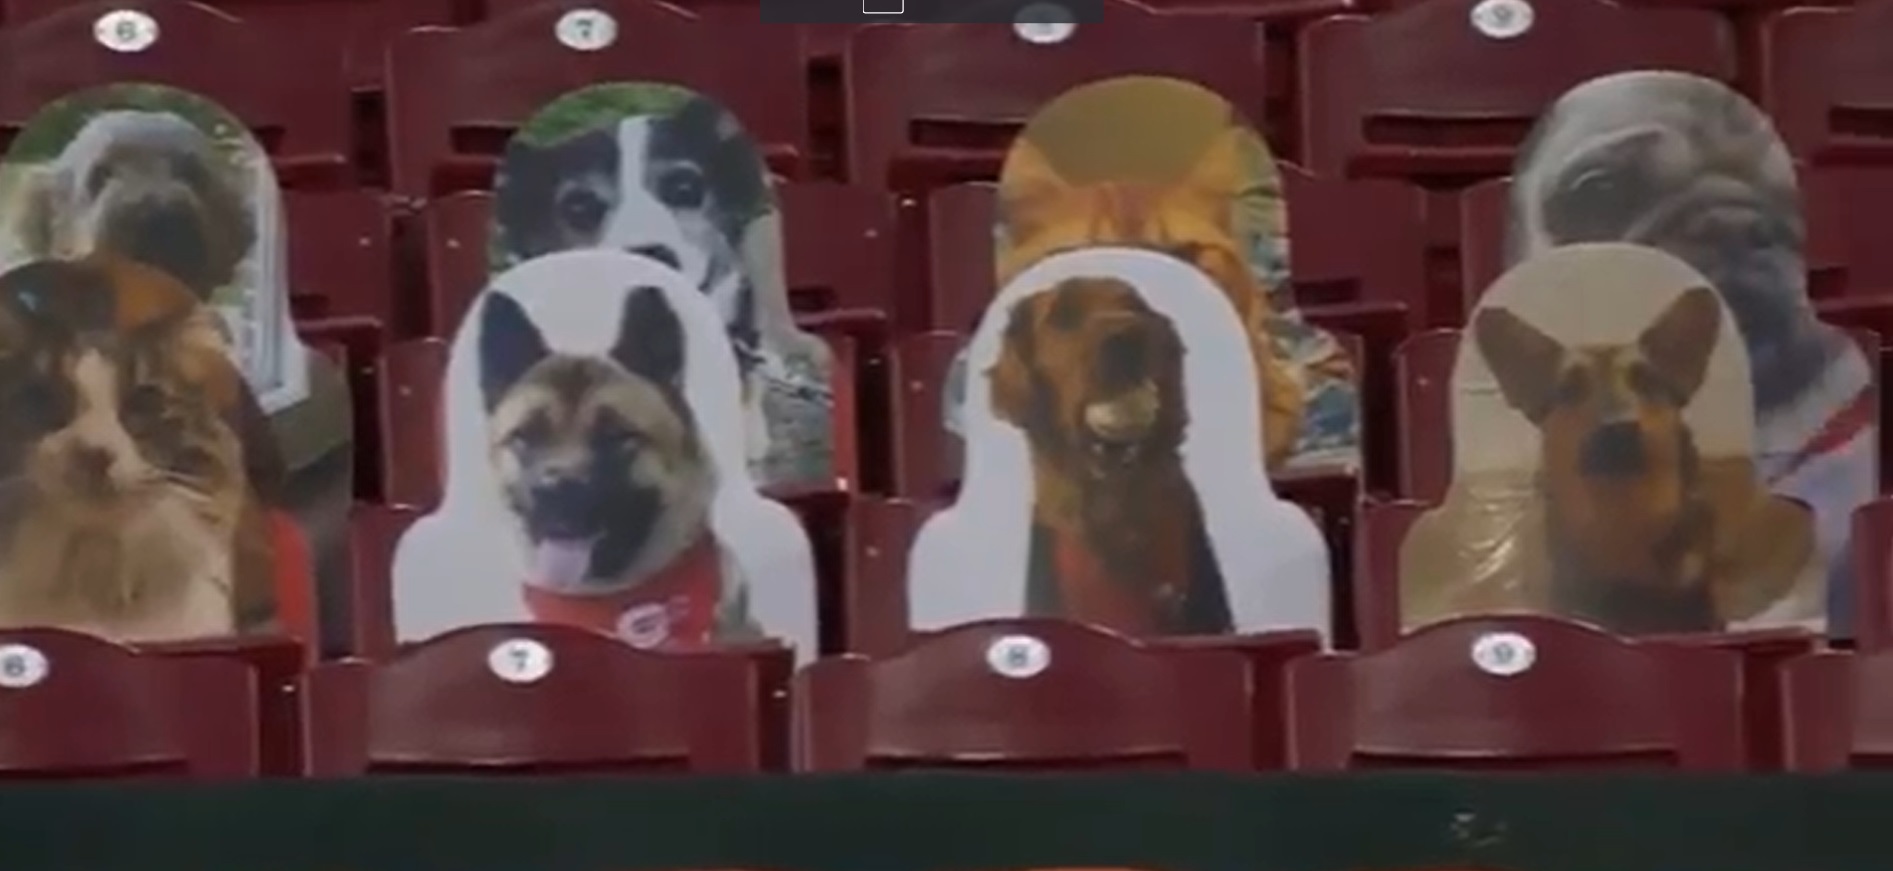 PHOTO Cincinatti Reds Only Have Dog Cutouts In The Stands